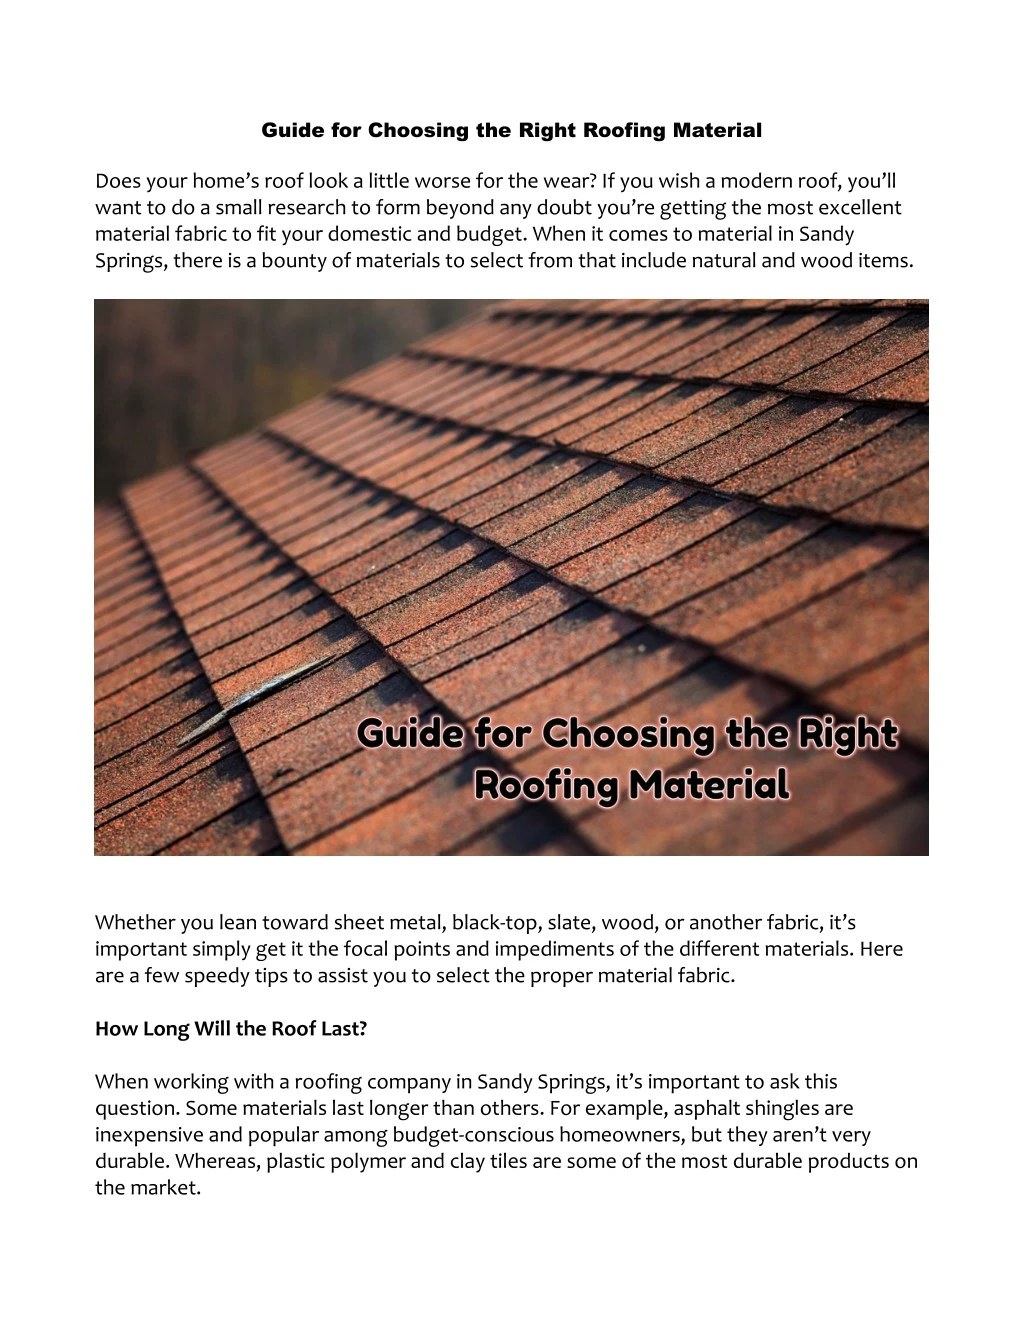 guide for choosing the right roofing material